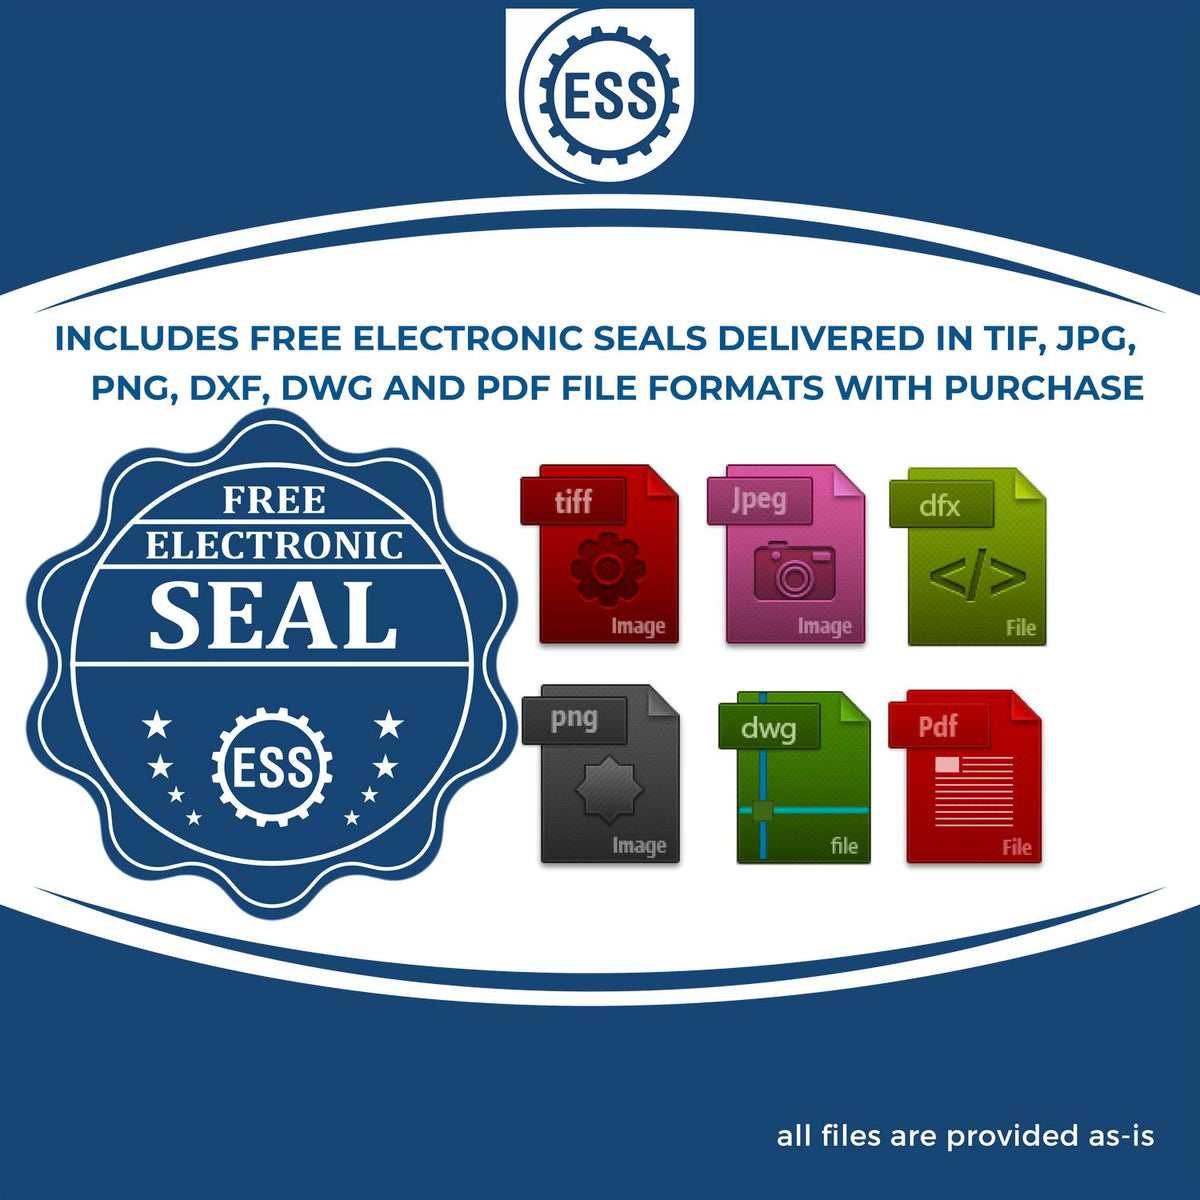 An infographic for the free electronic seal for the State of Vermont Extended Long Reach Geologist Seal illustrating the different file type icons such as DXF, DWG, TIF, JPG and PNG.